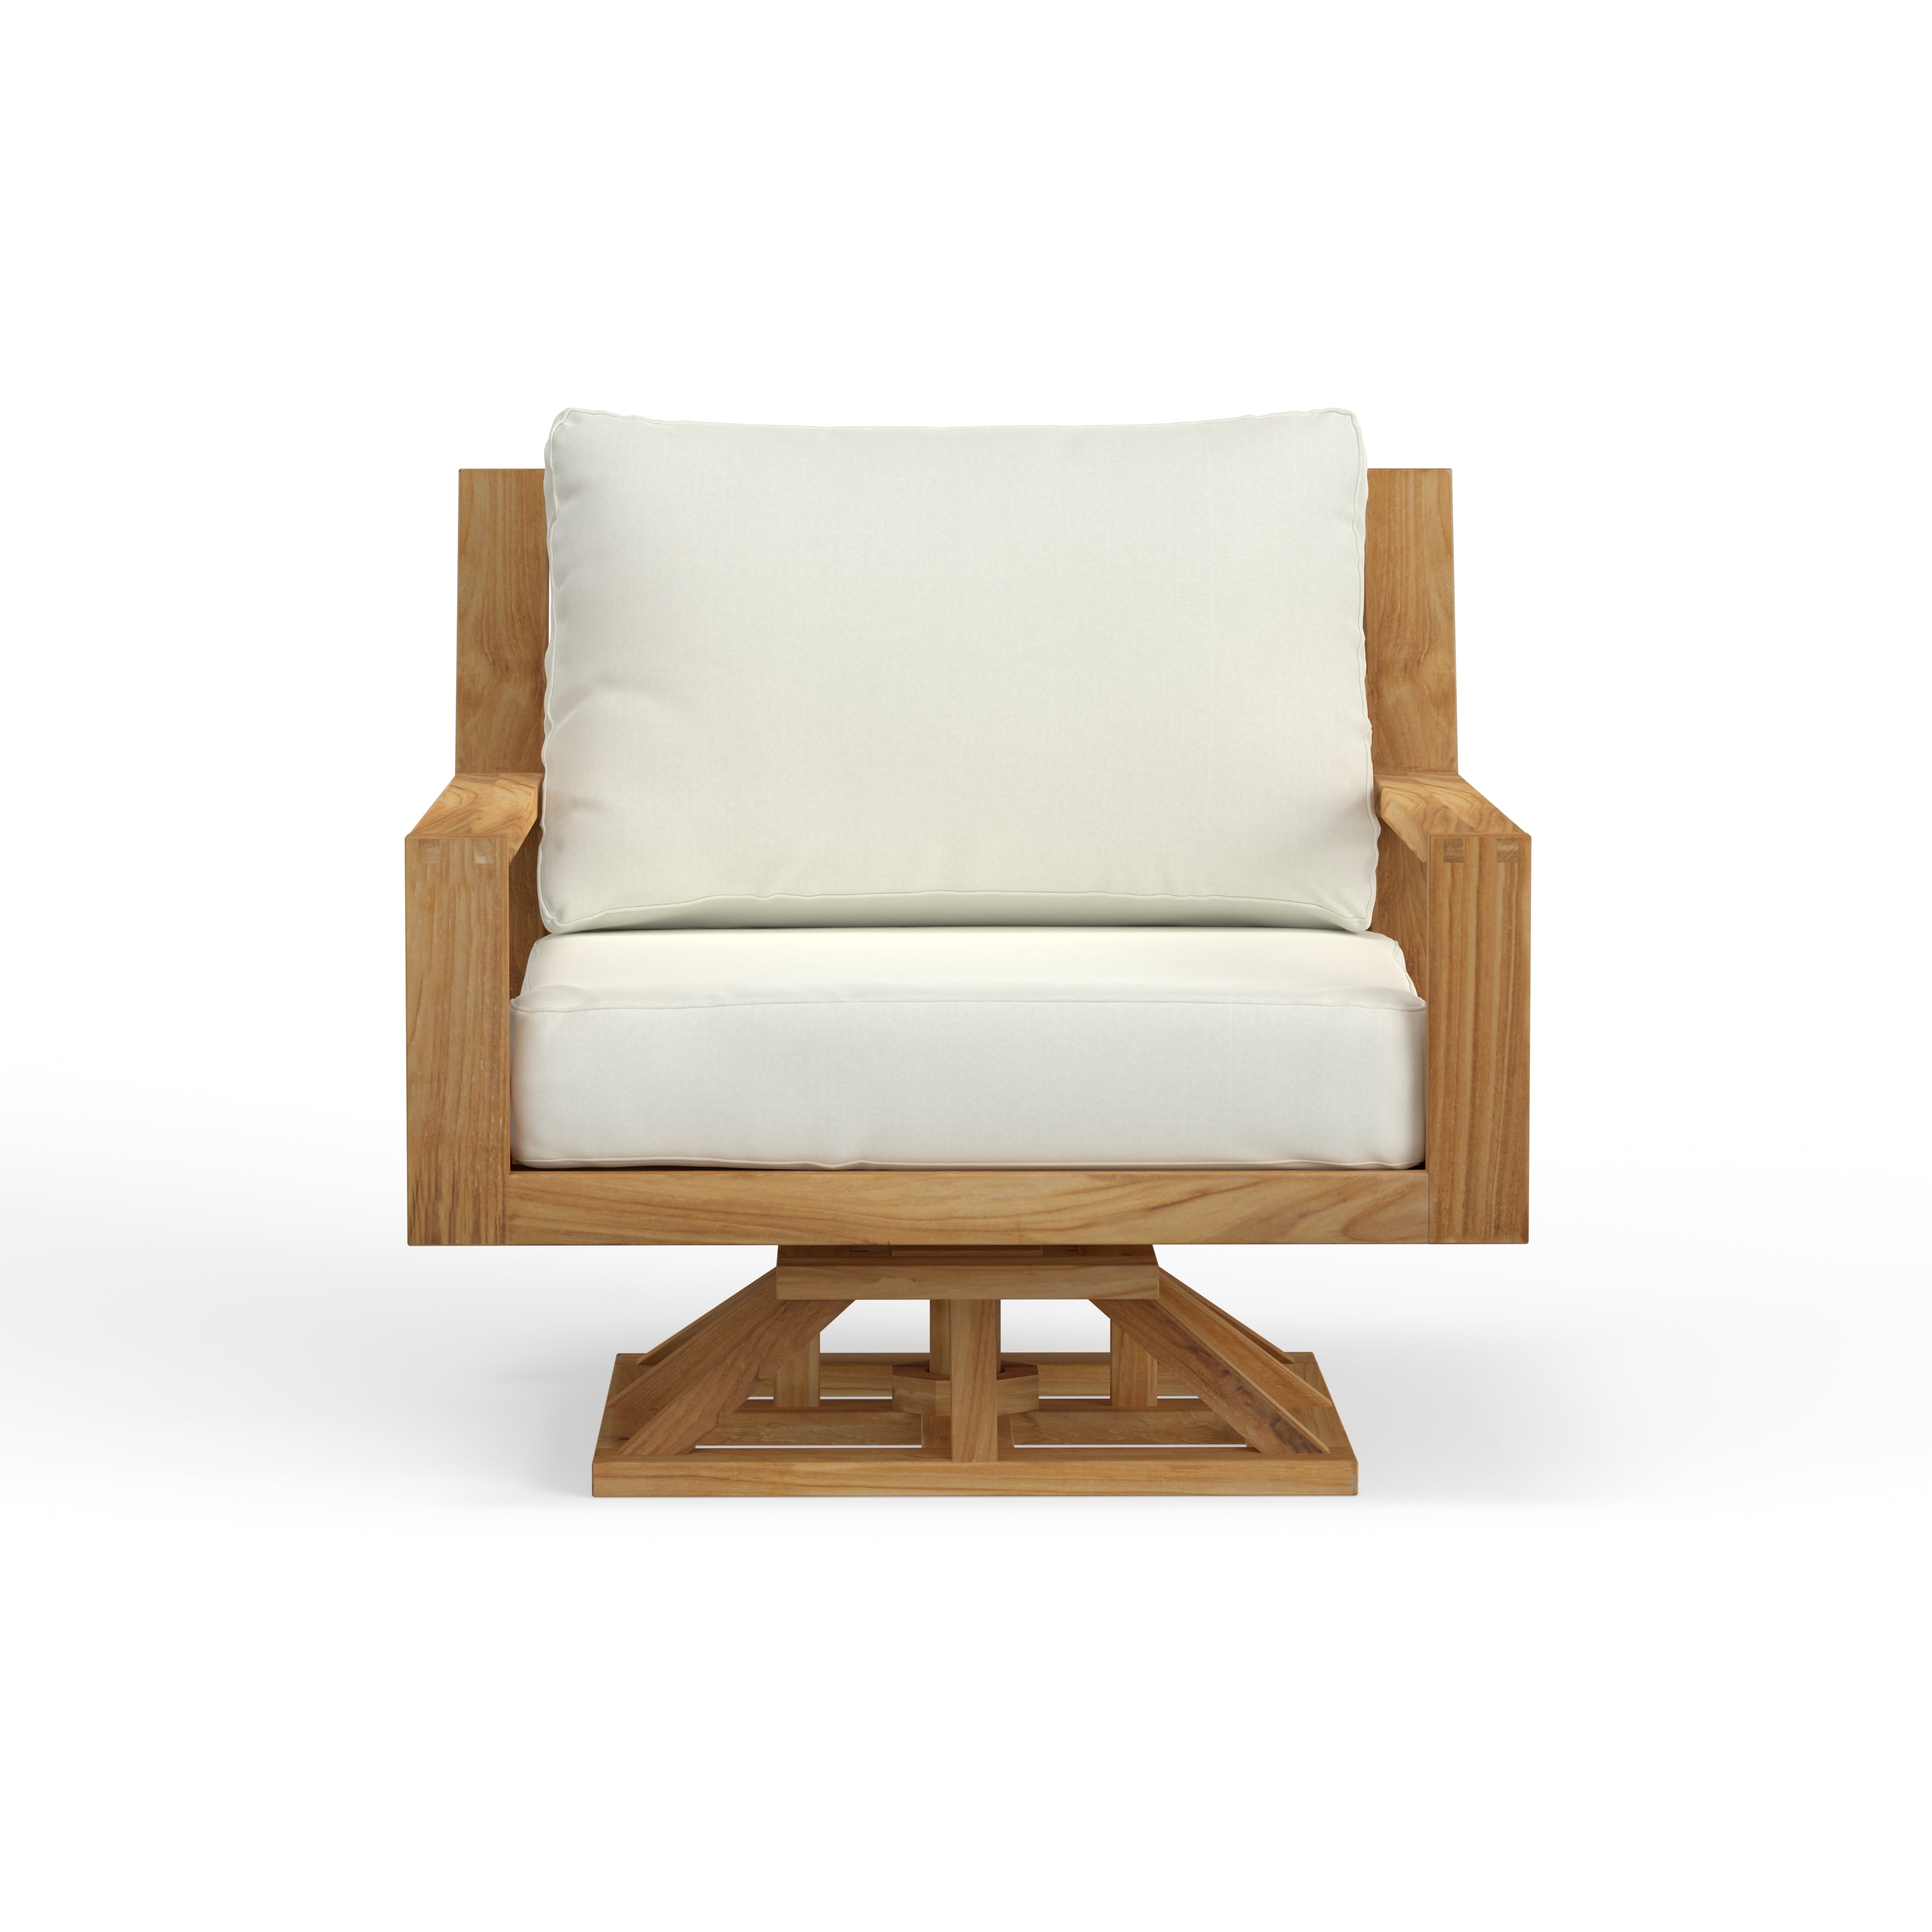 Highest Quality Teak Outdoor Chair That Will Last Forever